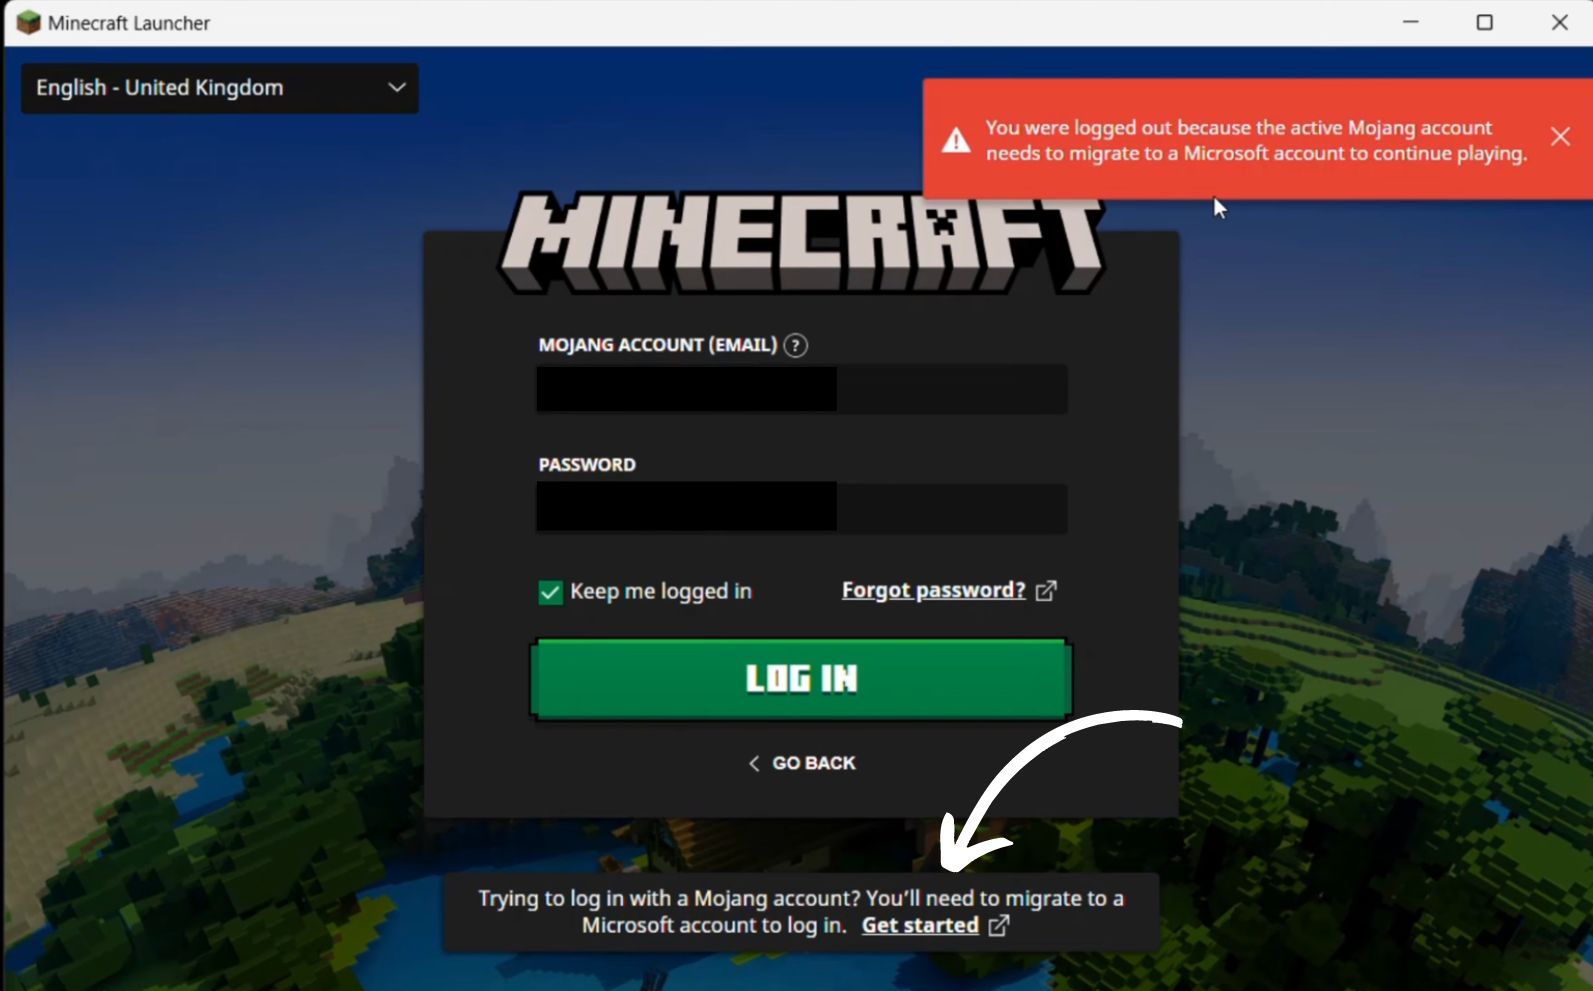 How to Migrate Your Old Minecraft Account Before It’s Too Late